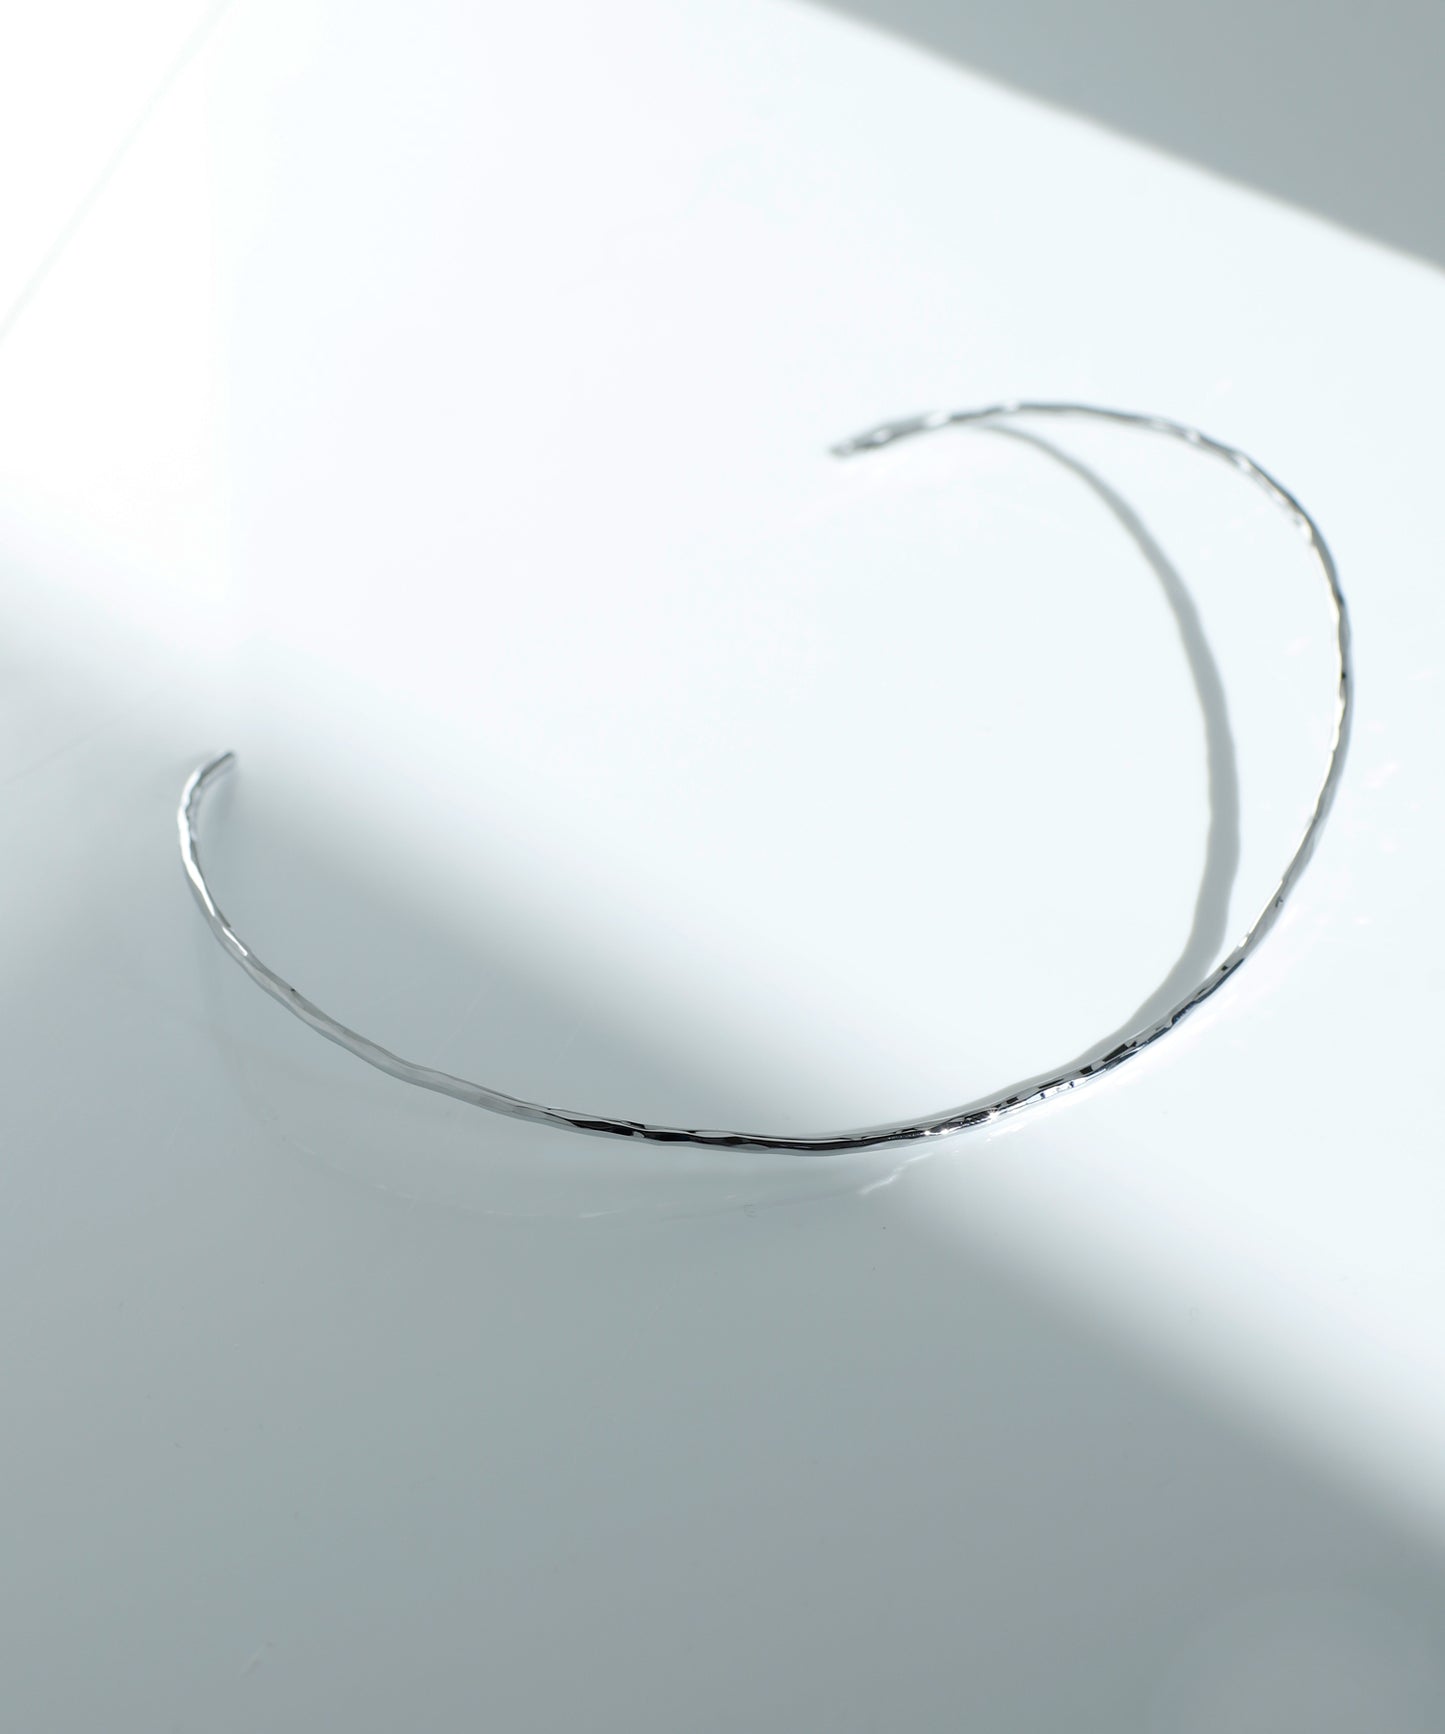 【Stainless Seel IP】Crafted Metal Choker